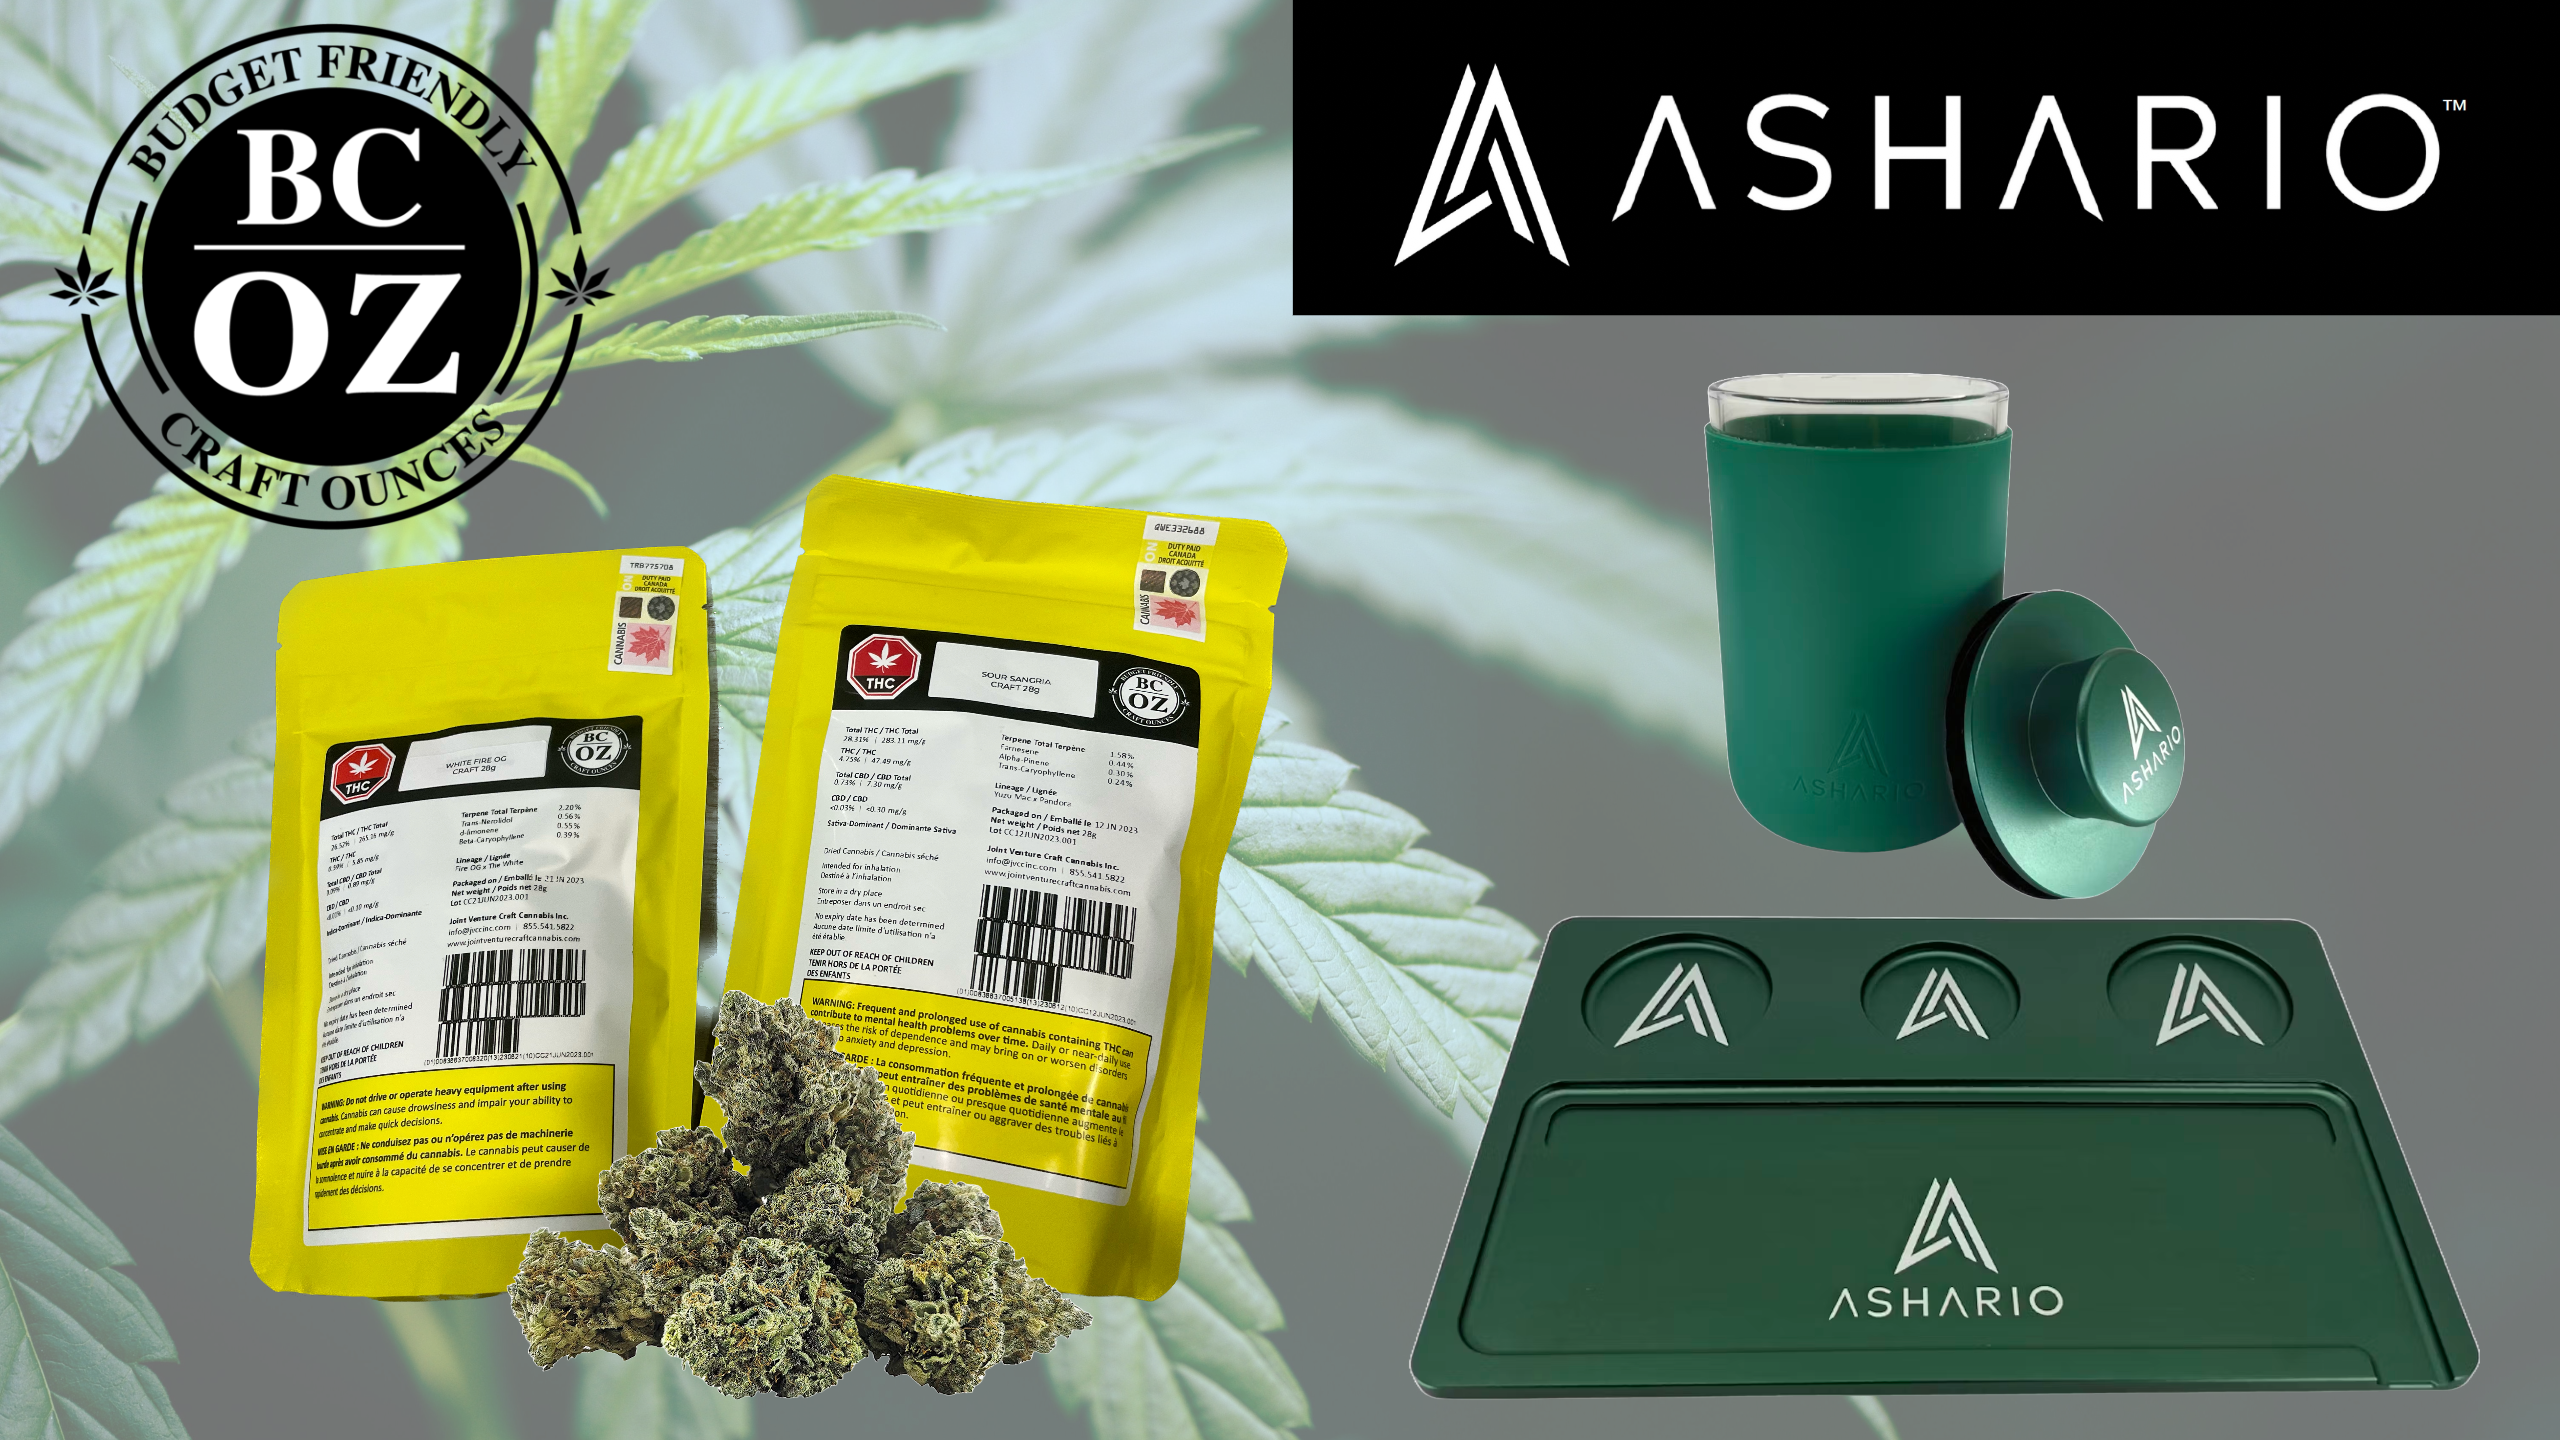 Introducing BC OZ, the latest addition to Ashario Cannabis's curated collection of premium brands. Dive into a world of exceptional quality and craftsmanship with BC OZ's meticulously cultivated cannabis flower.